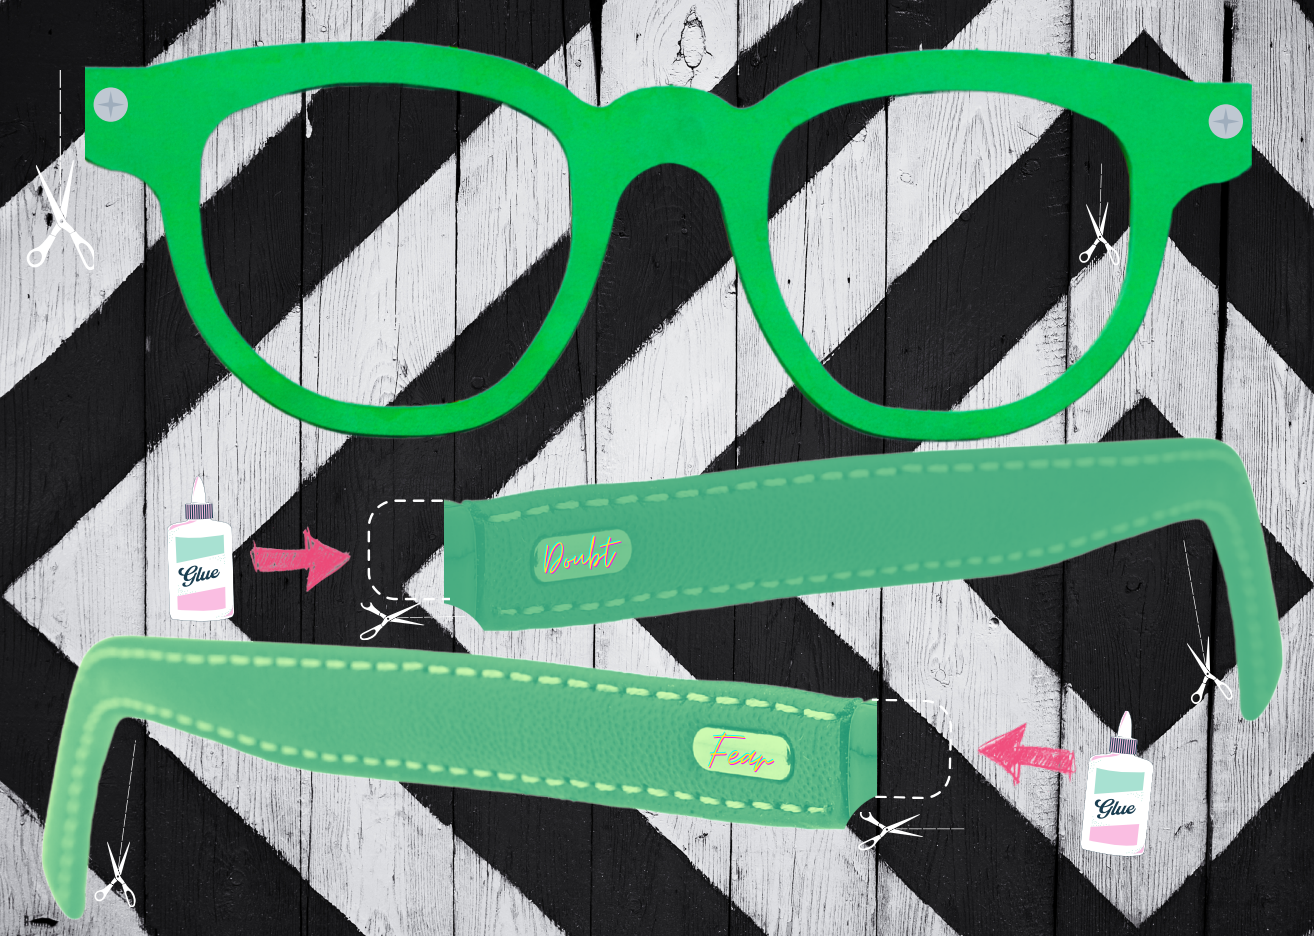 Digital artwork of the frames and arms of a pair of green glasses. One arm has 